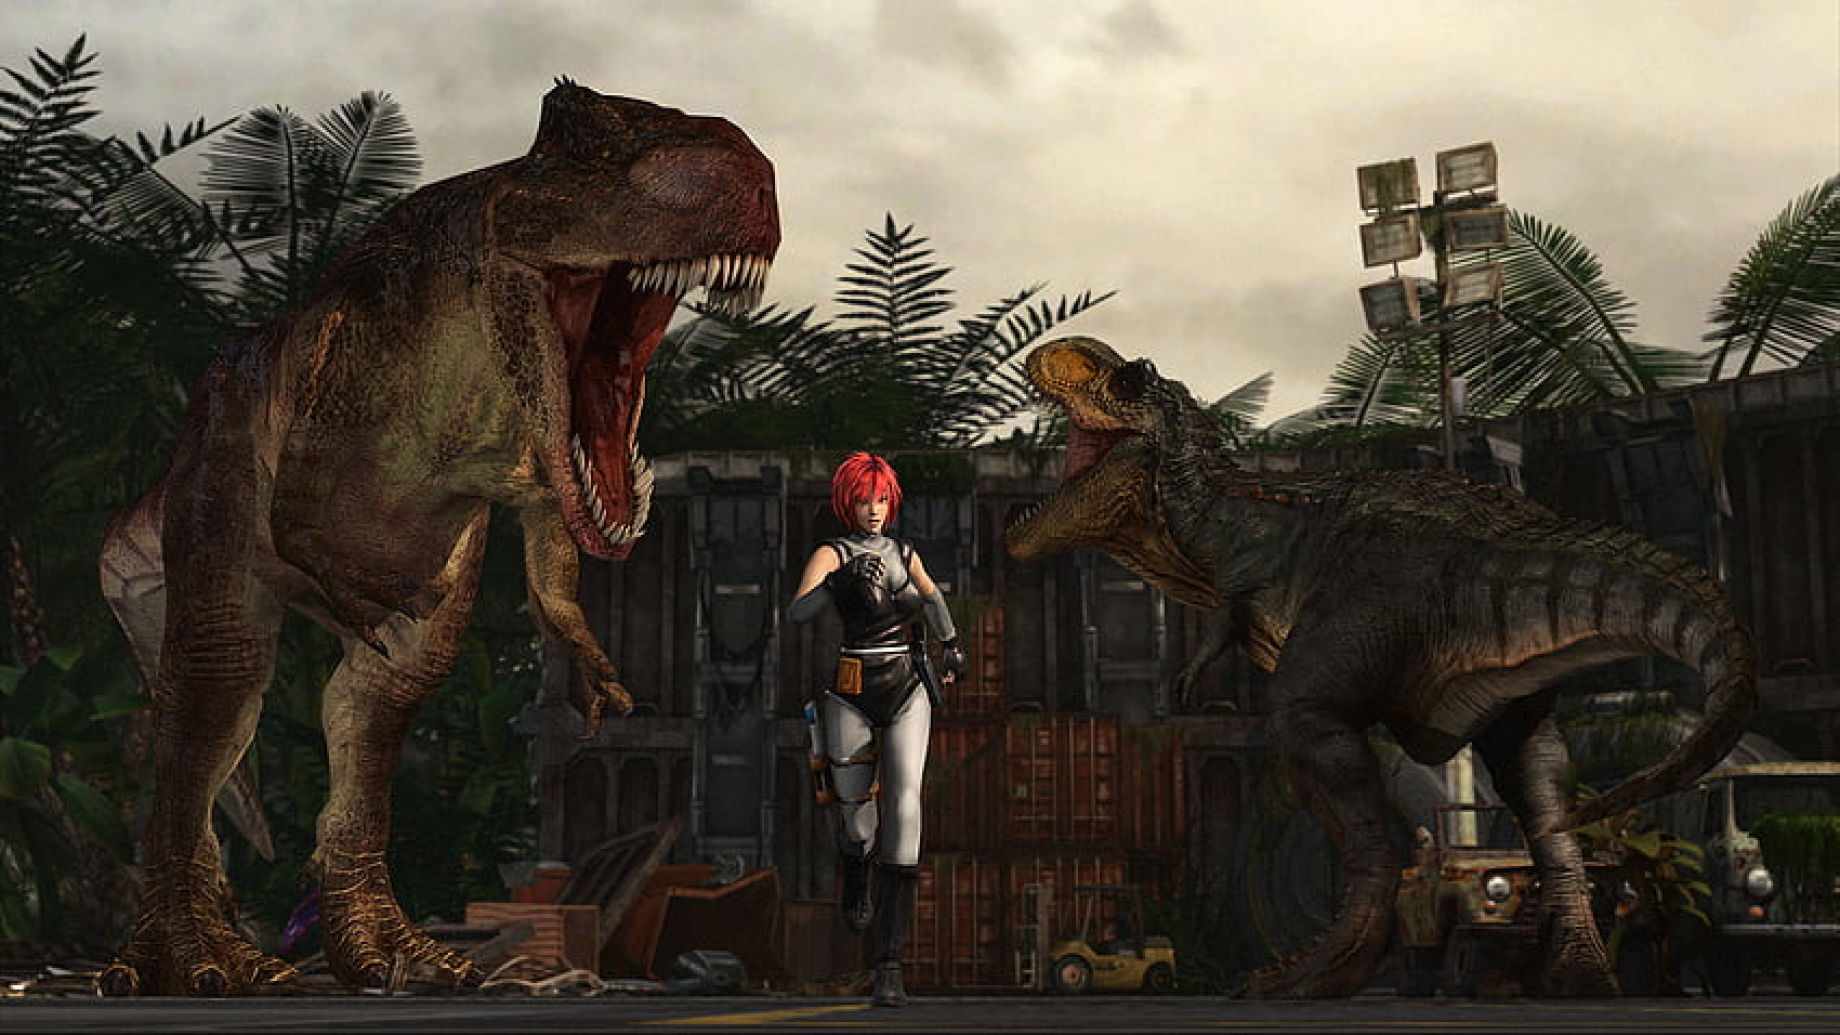 Dragon's Dogma 2, Dino Crisis Remake and more possible from Capcom